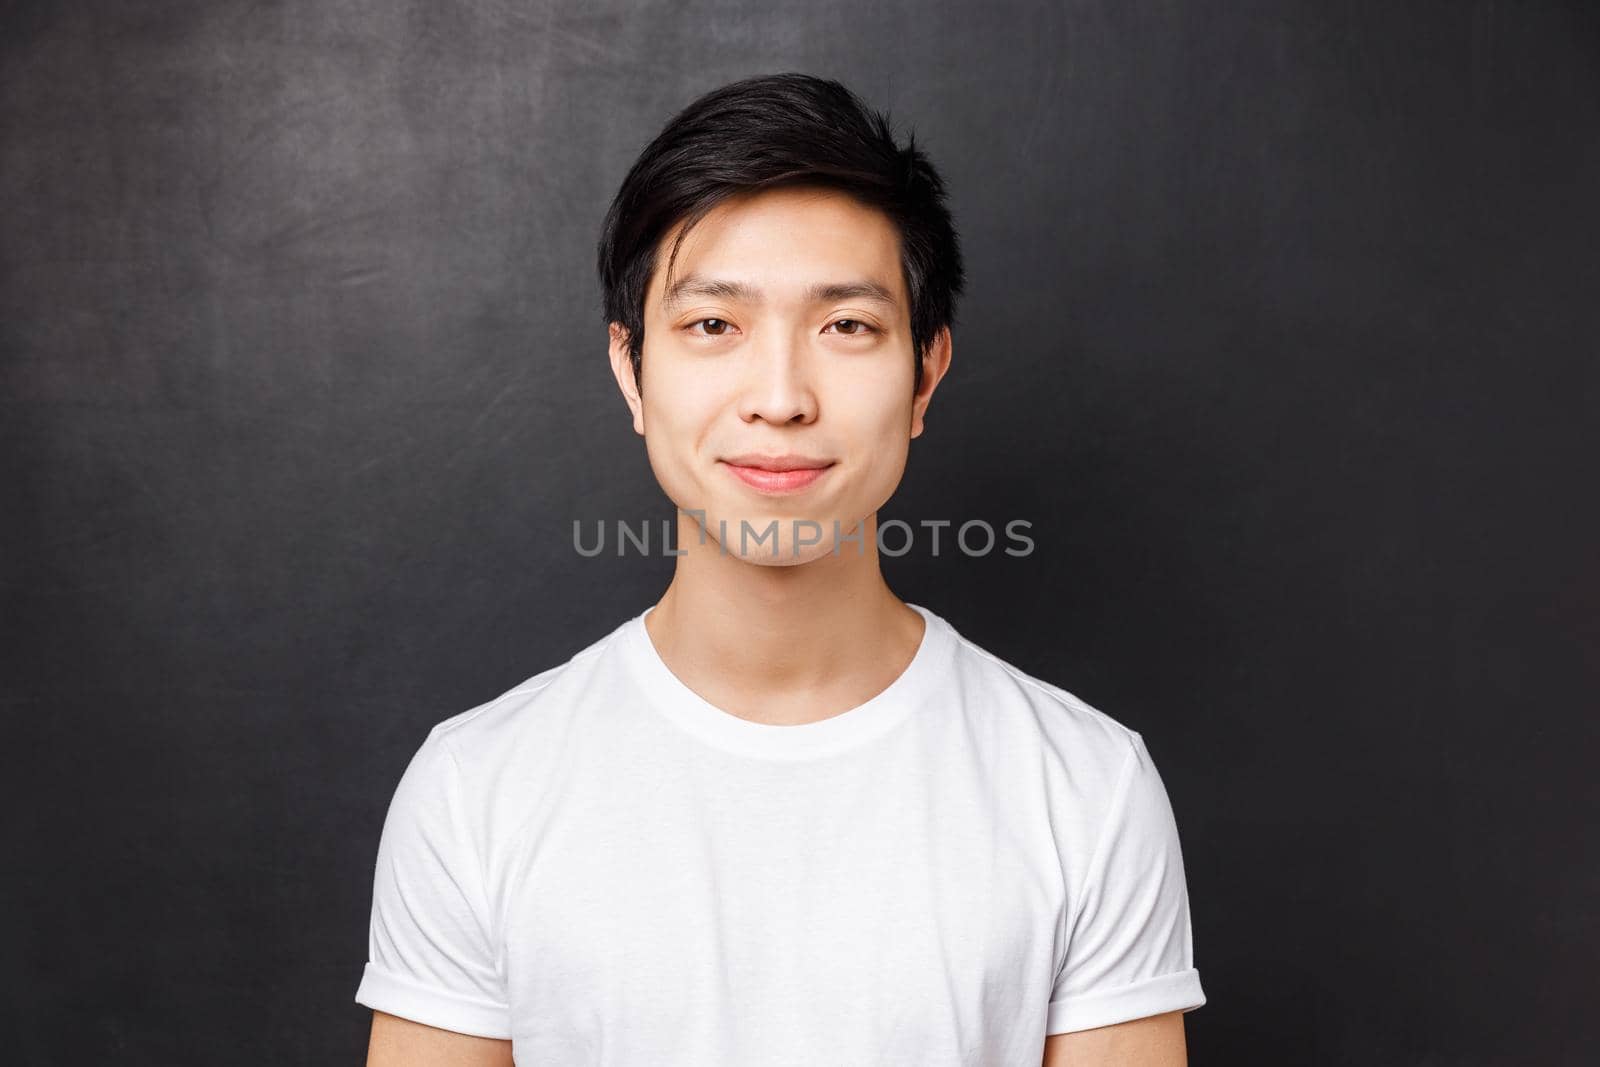 Close-up portrait of smiling friendly-looking young asian male model in white t-shirt, looking at camera and grinning, standing over black background, concept of people emotions and lifestyle.